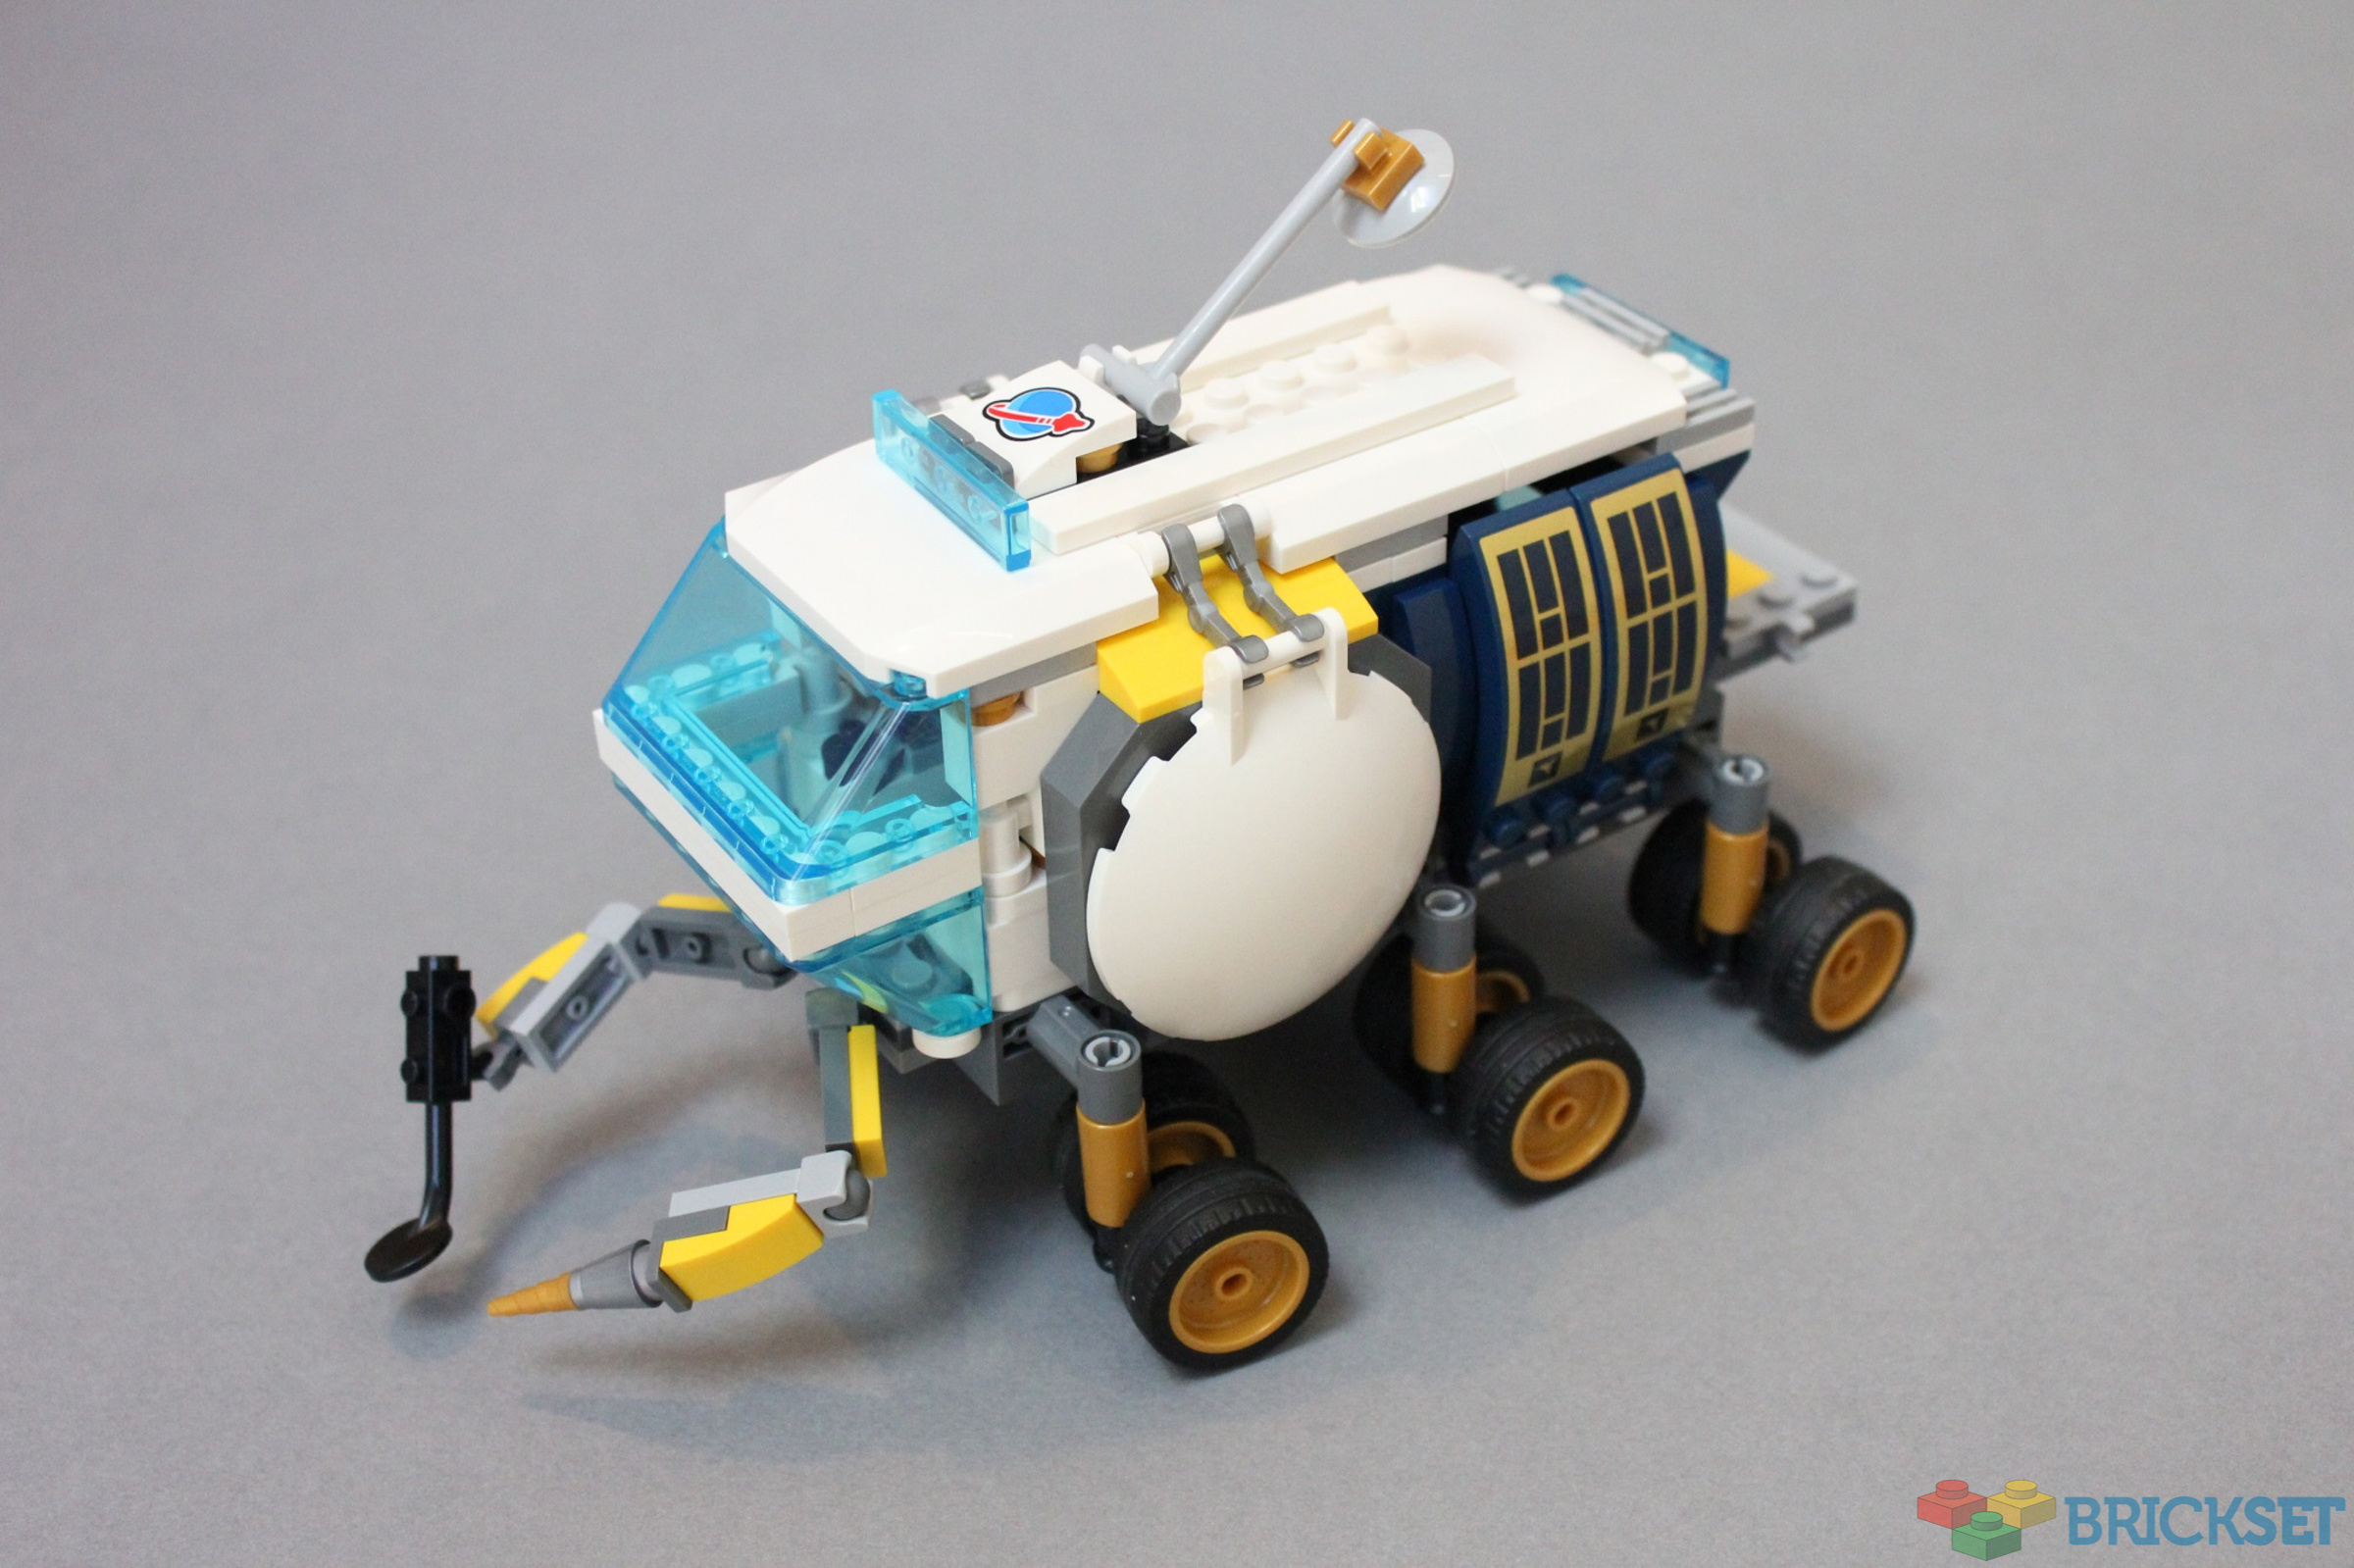 Lego Space: Most Up-to-Date Encyclopedia, News & Reviews